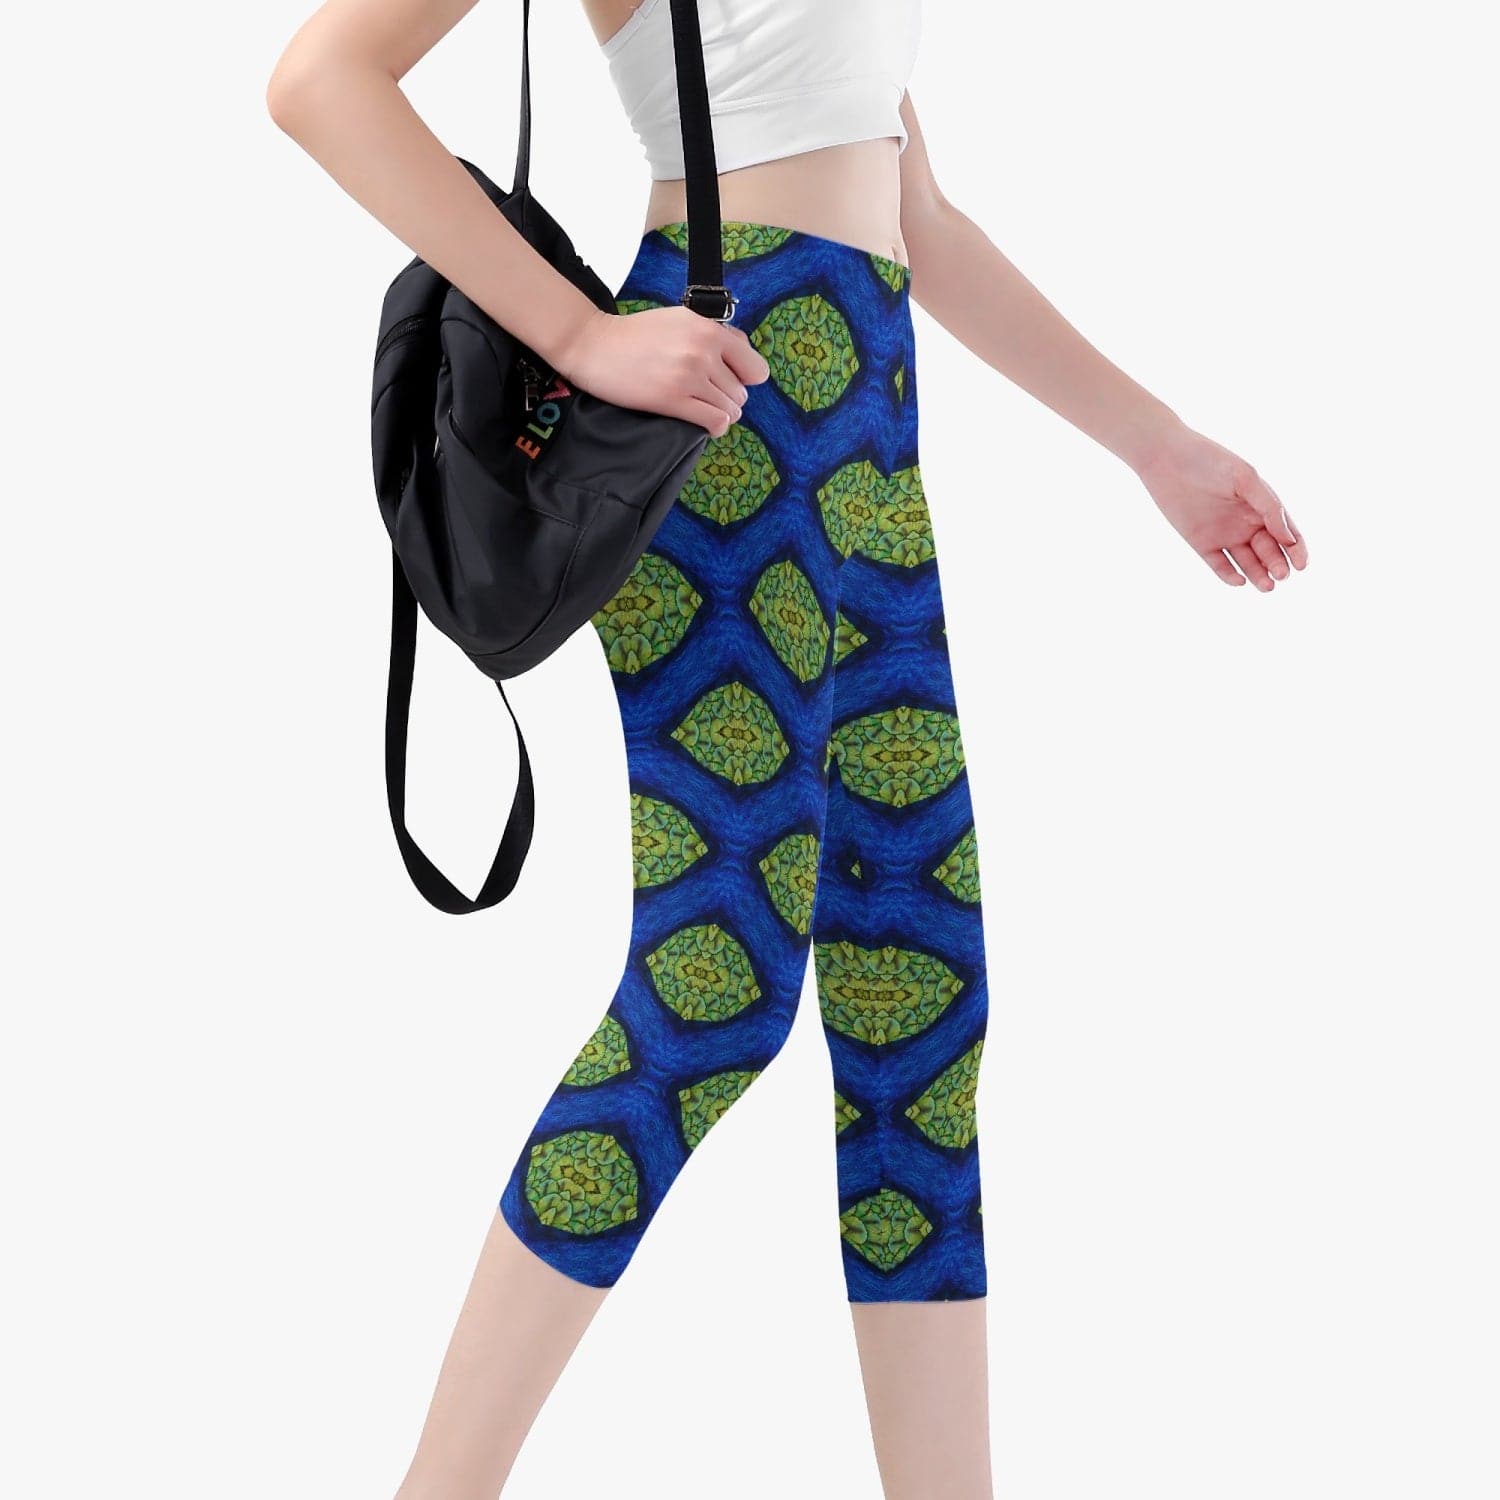 The Heart and Brain Connection  Short Type Yoga Pants, by Sensus Studio Design